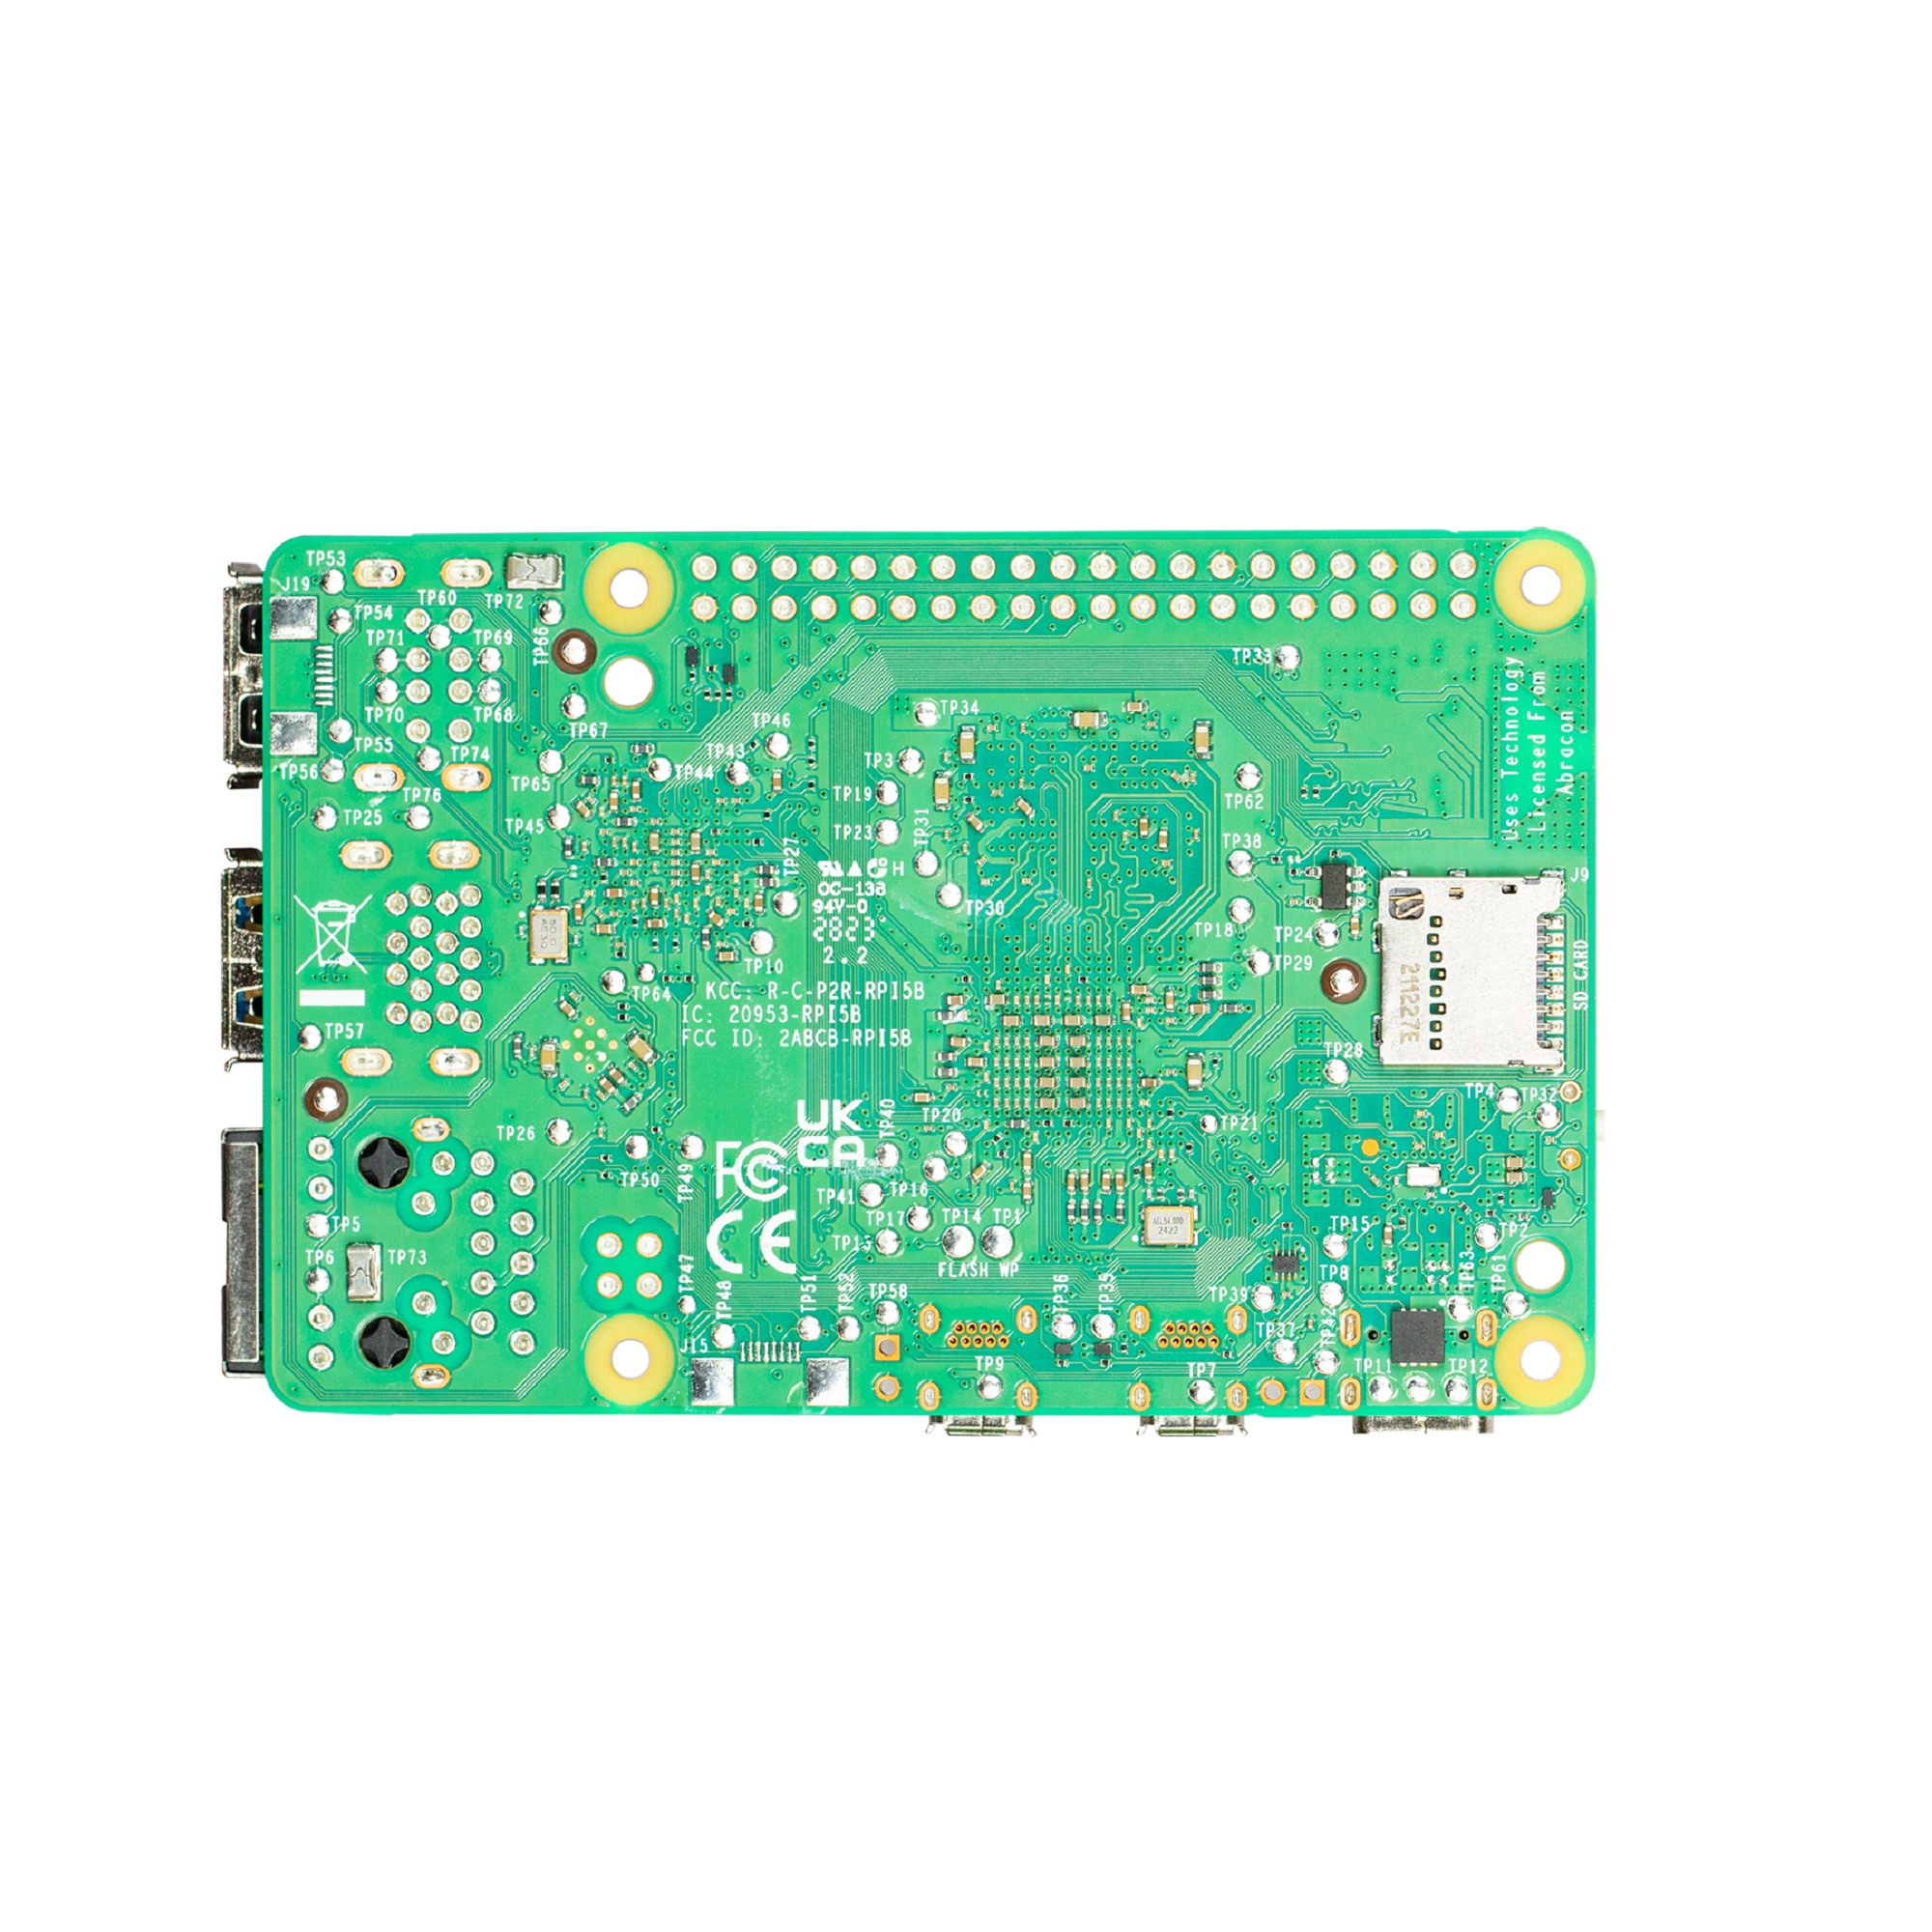 Designing the Raspberry Pi 5: PCIe, Power and Peripherals